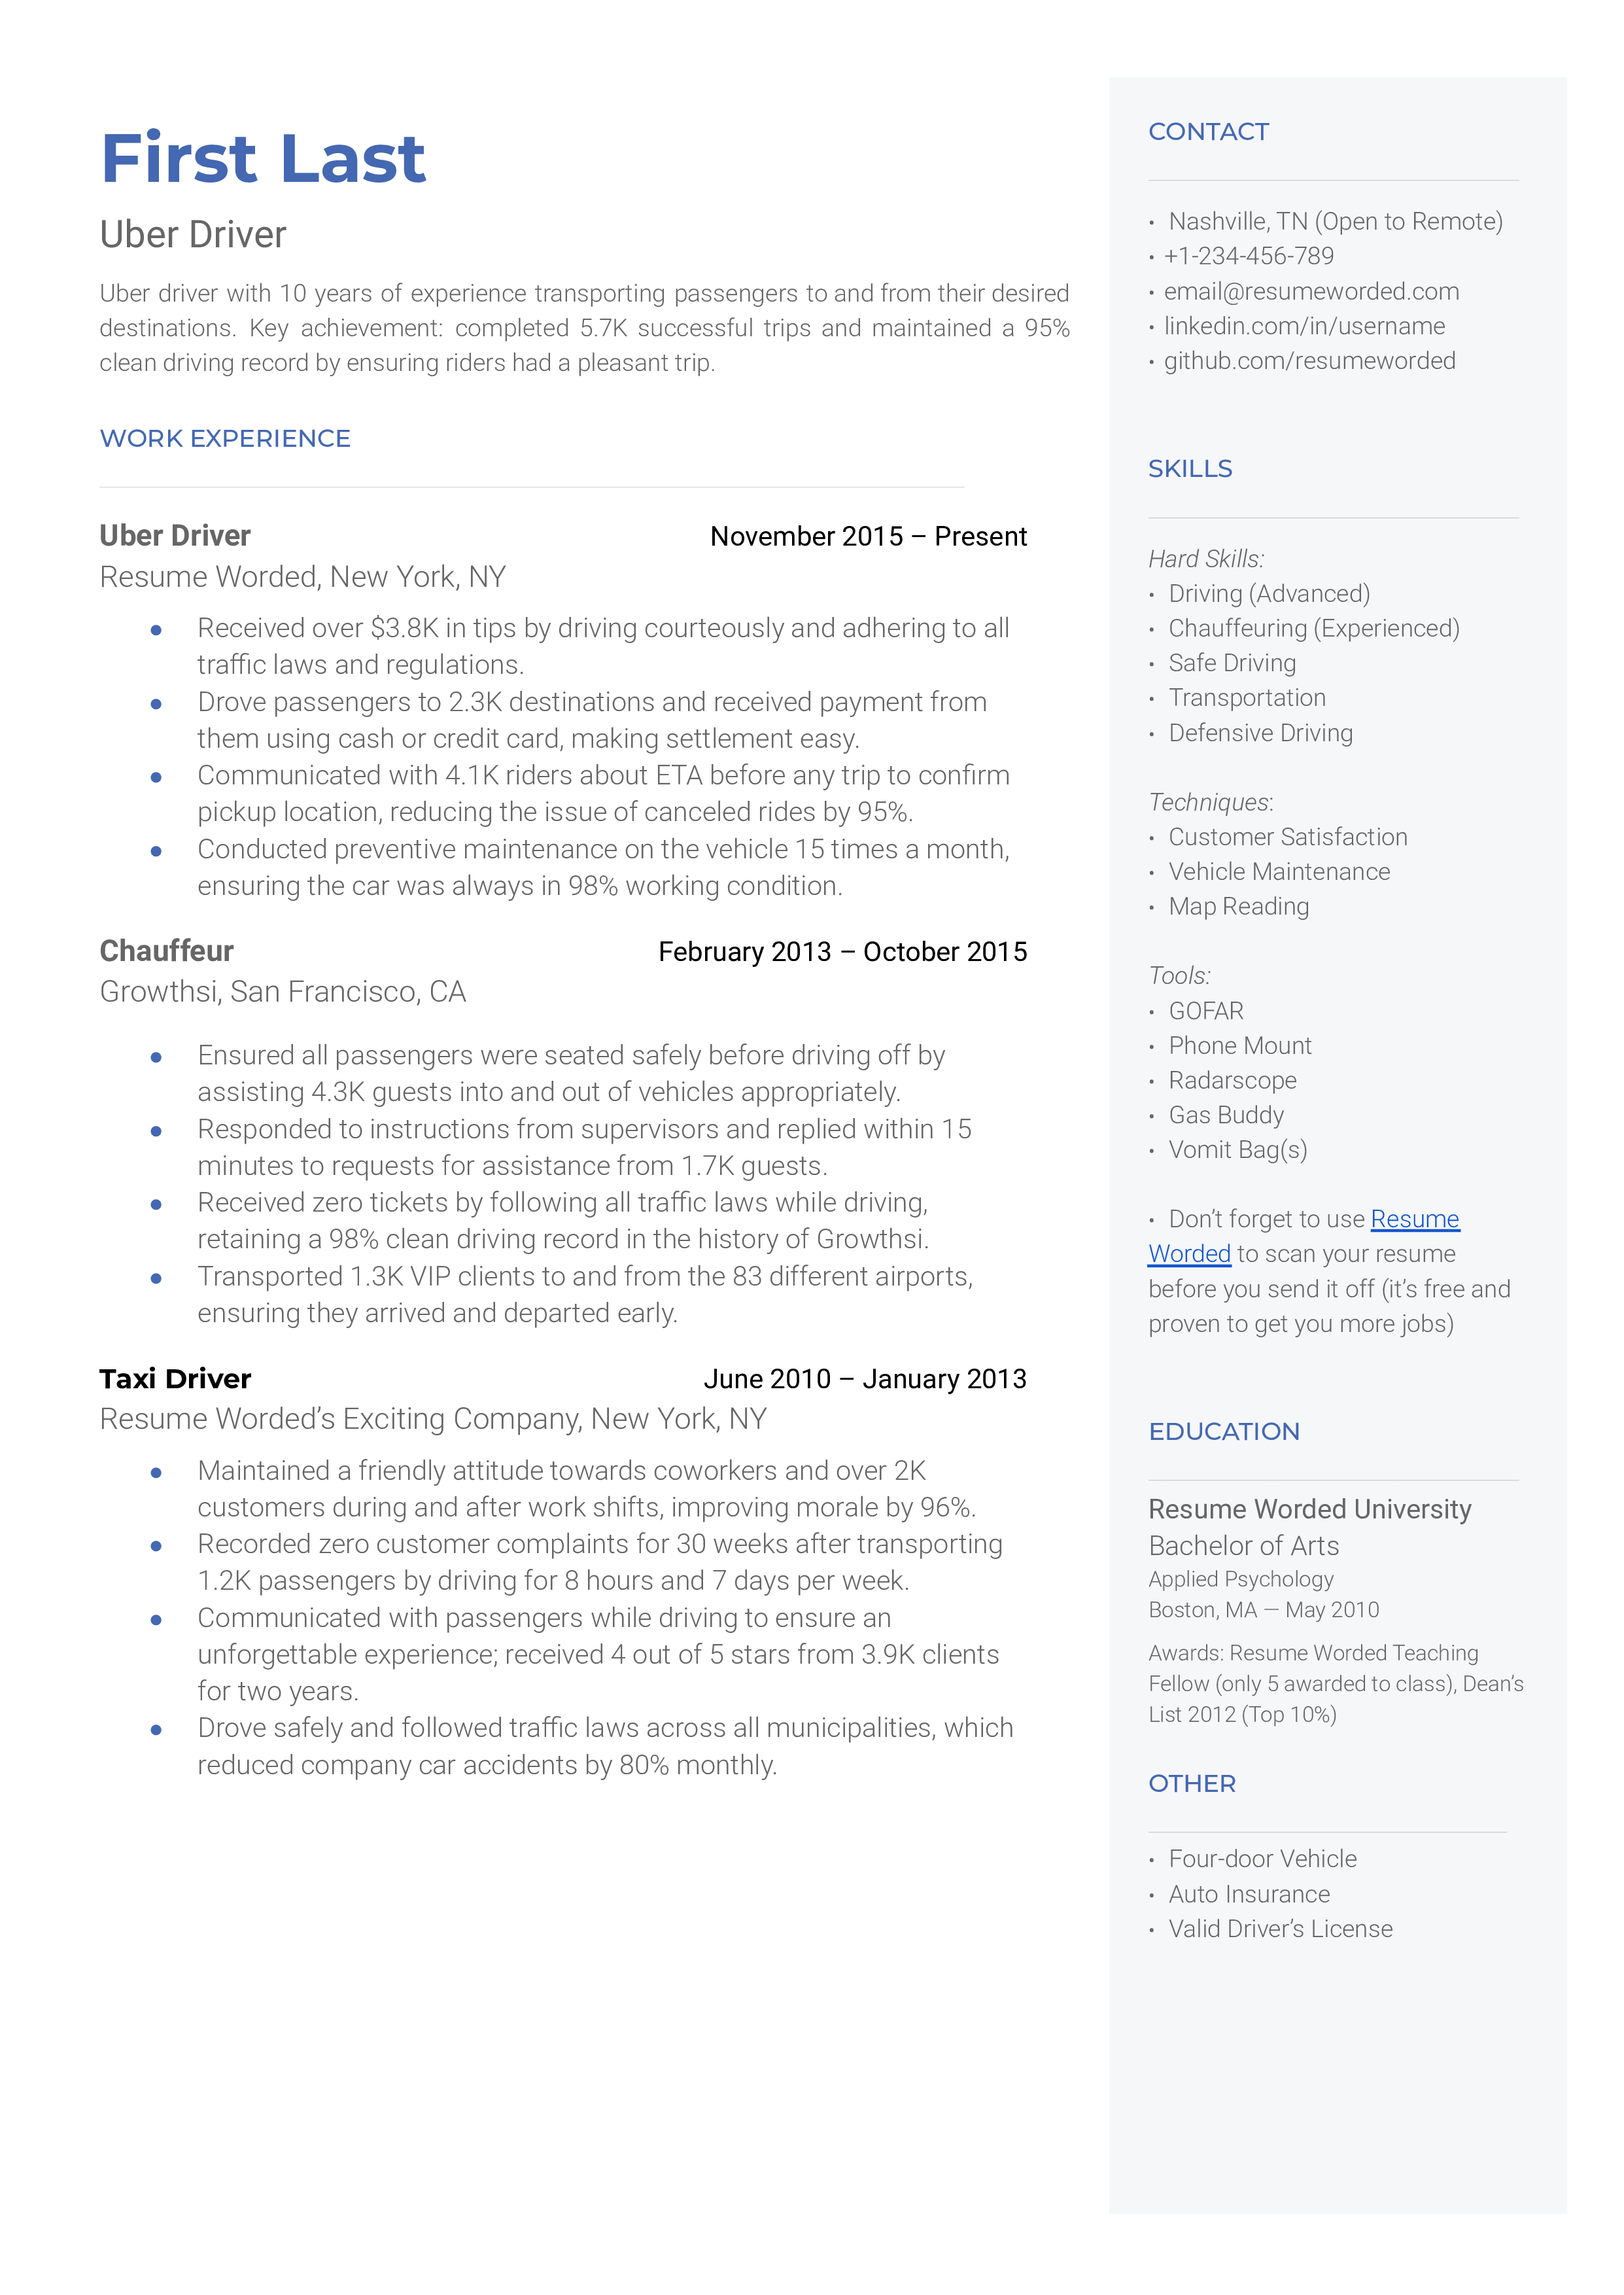 An Uber driver resume sample that highlights the applicant’s qualifications and experience.